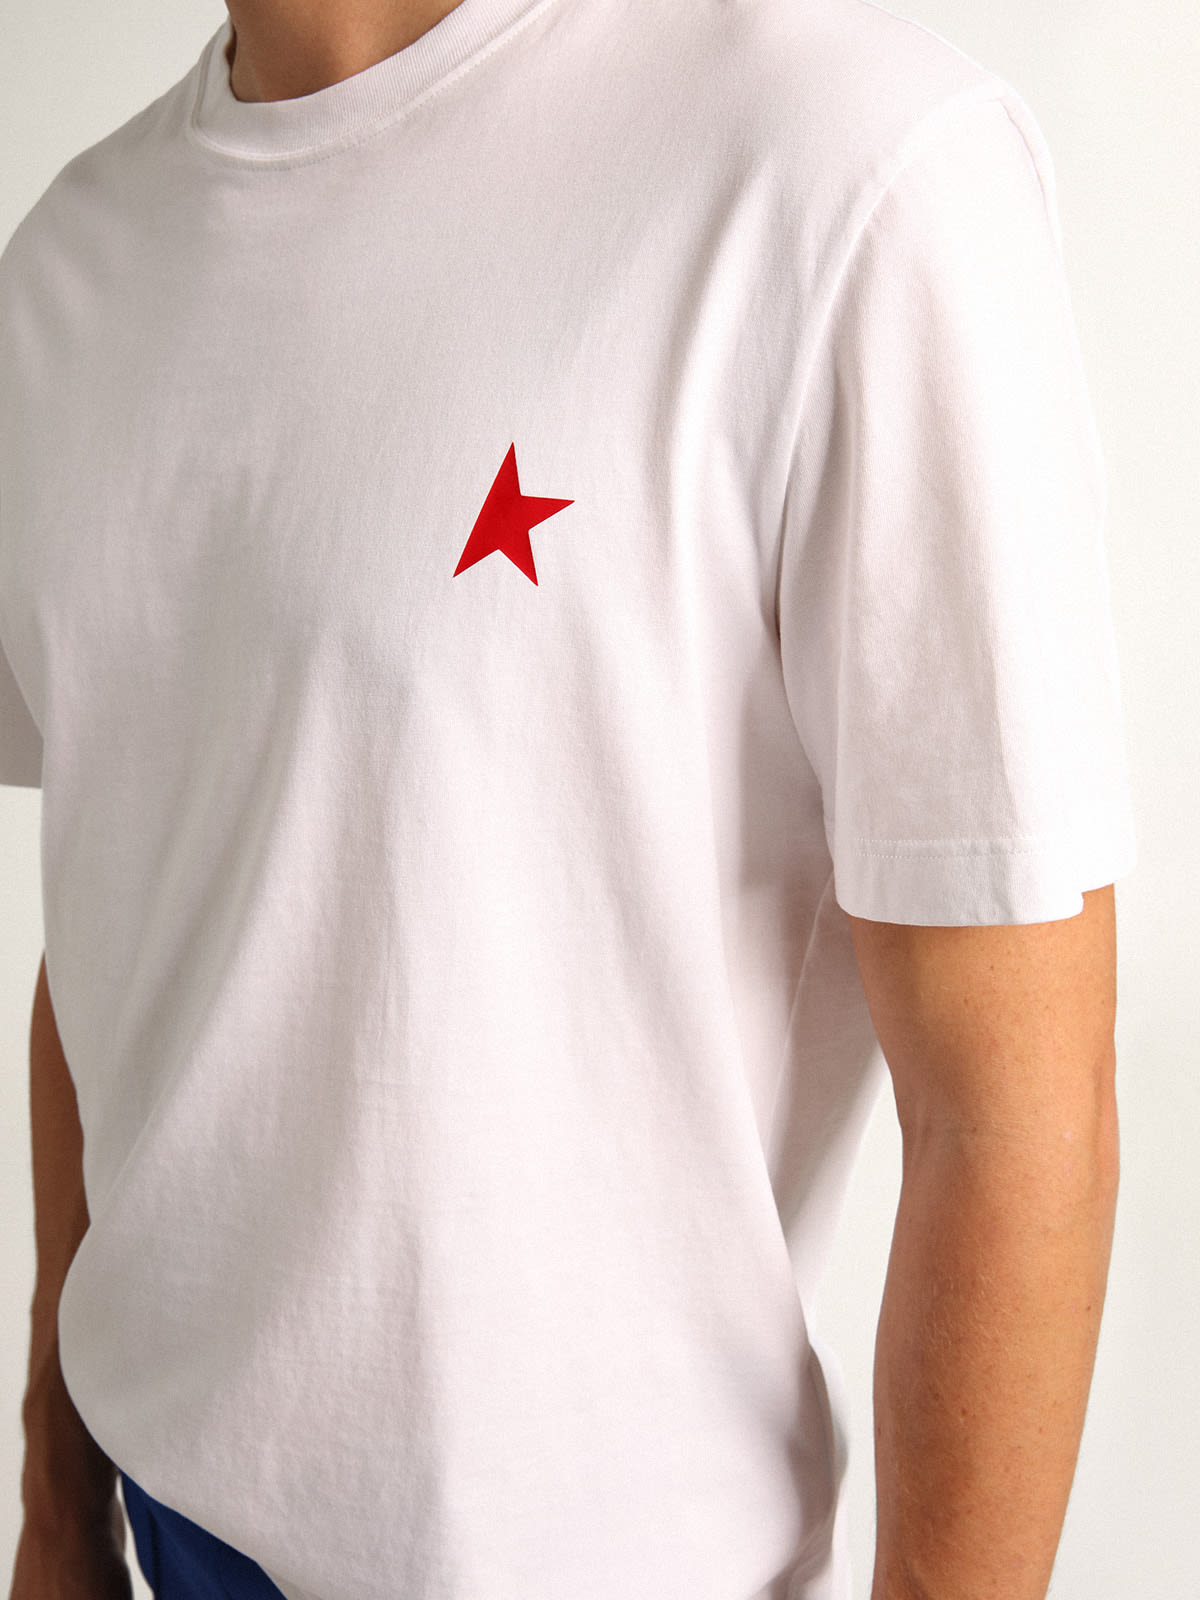 Golden Goose - Men's white T-shirt with contrasting red star in 